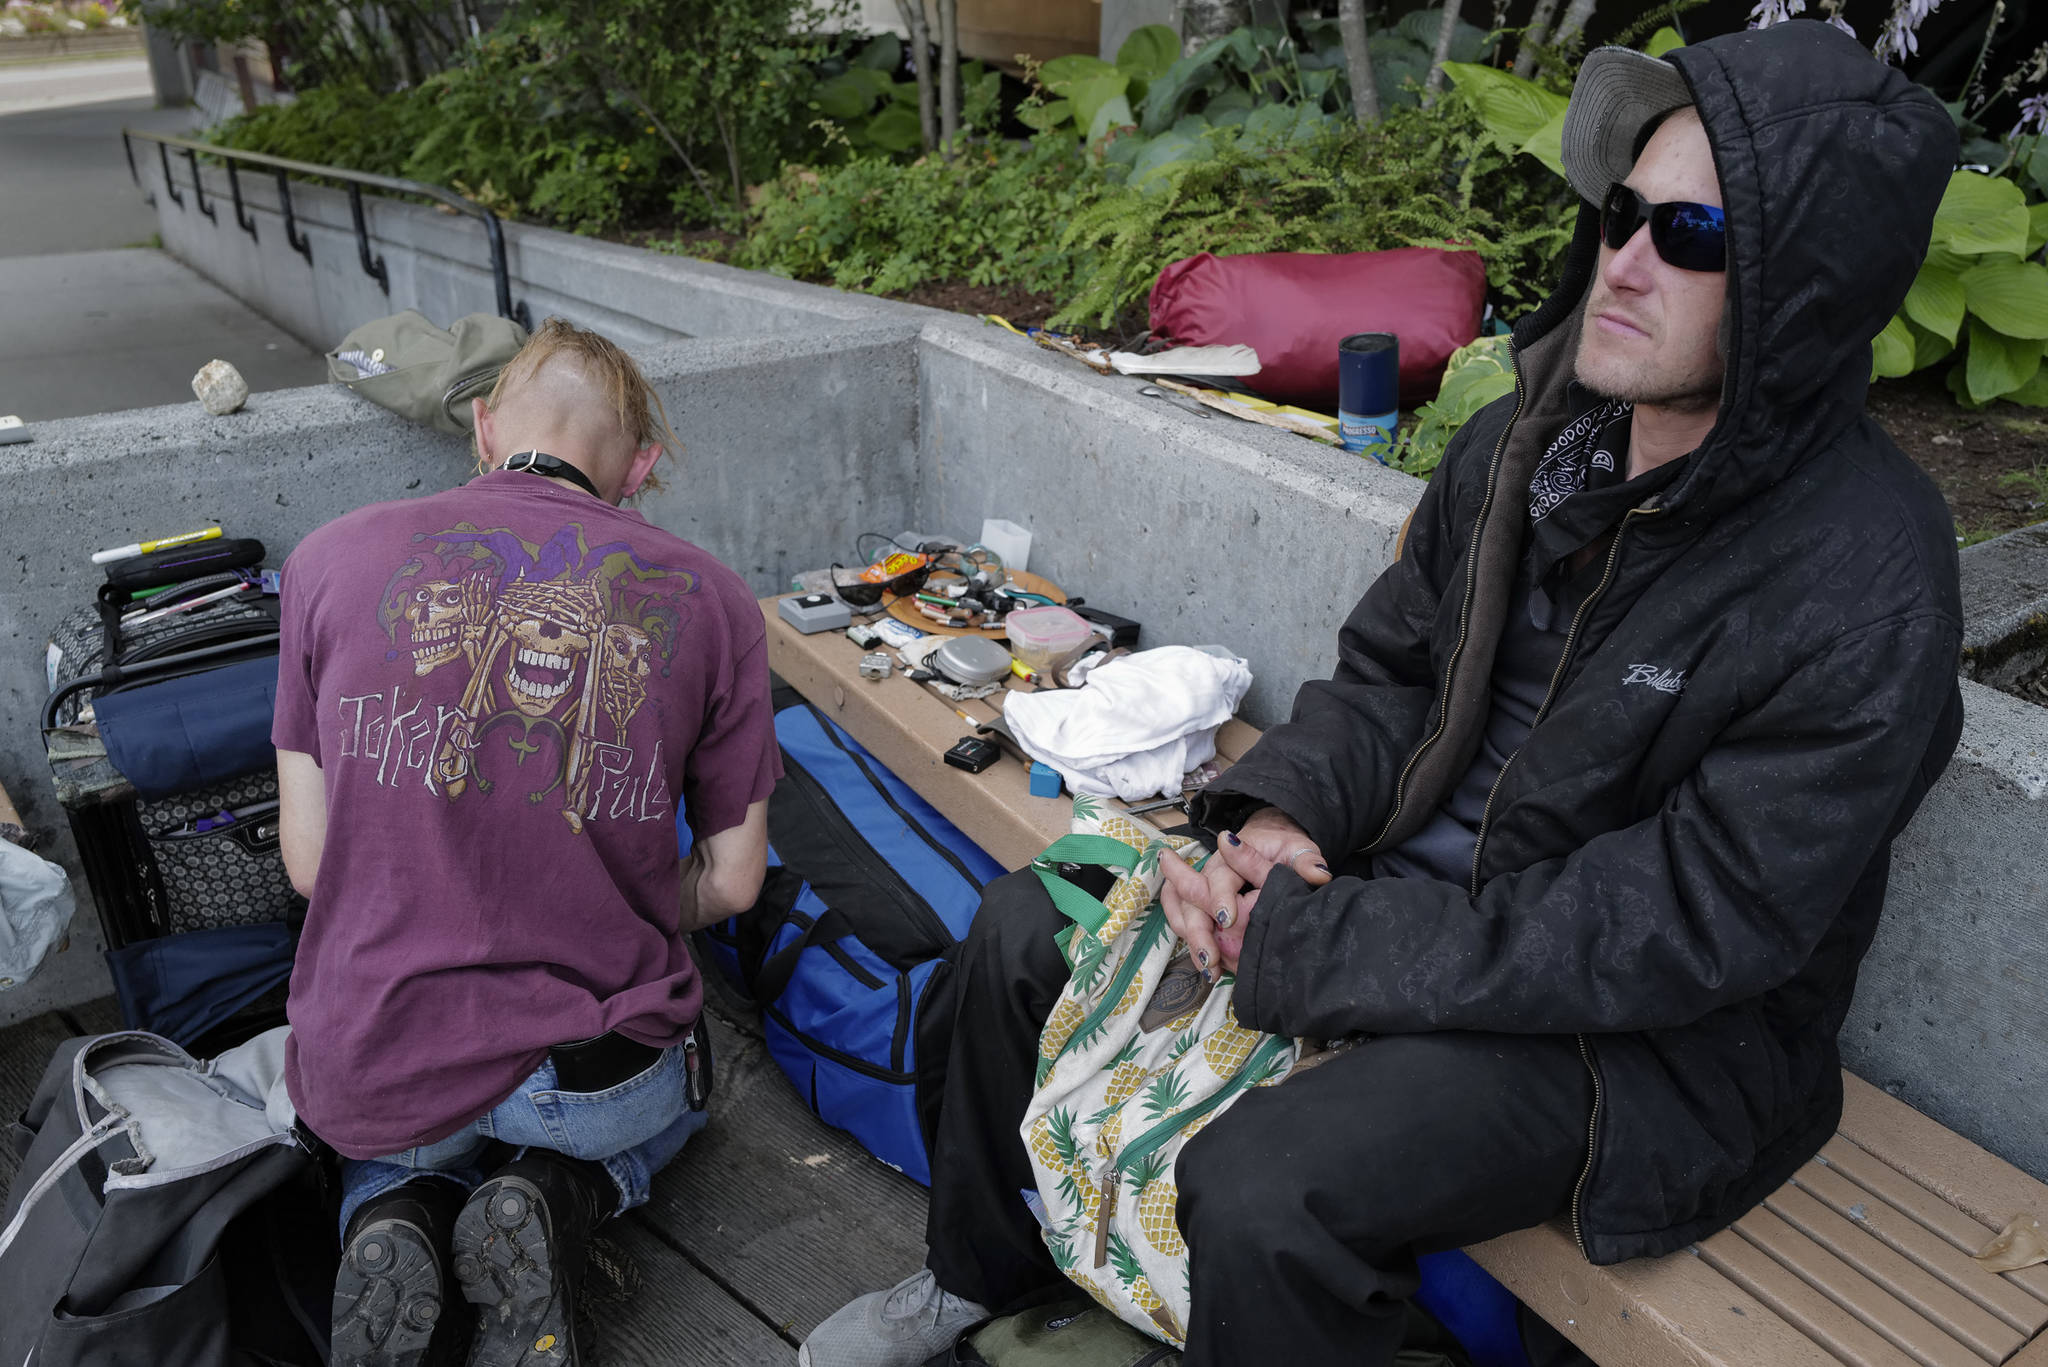 Justin Fairclough, right, and Keoki Cunningham organize their belongings and hang out in front of the Juneau Downtown Library on Tuesday, Aug. 13, 2019. They are currently staying at the Glory Hall at night. (Michael Penn | Juneau Empire)